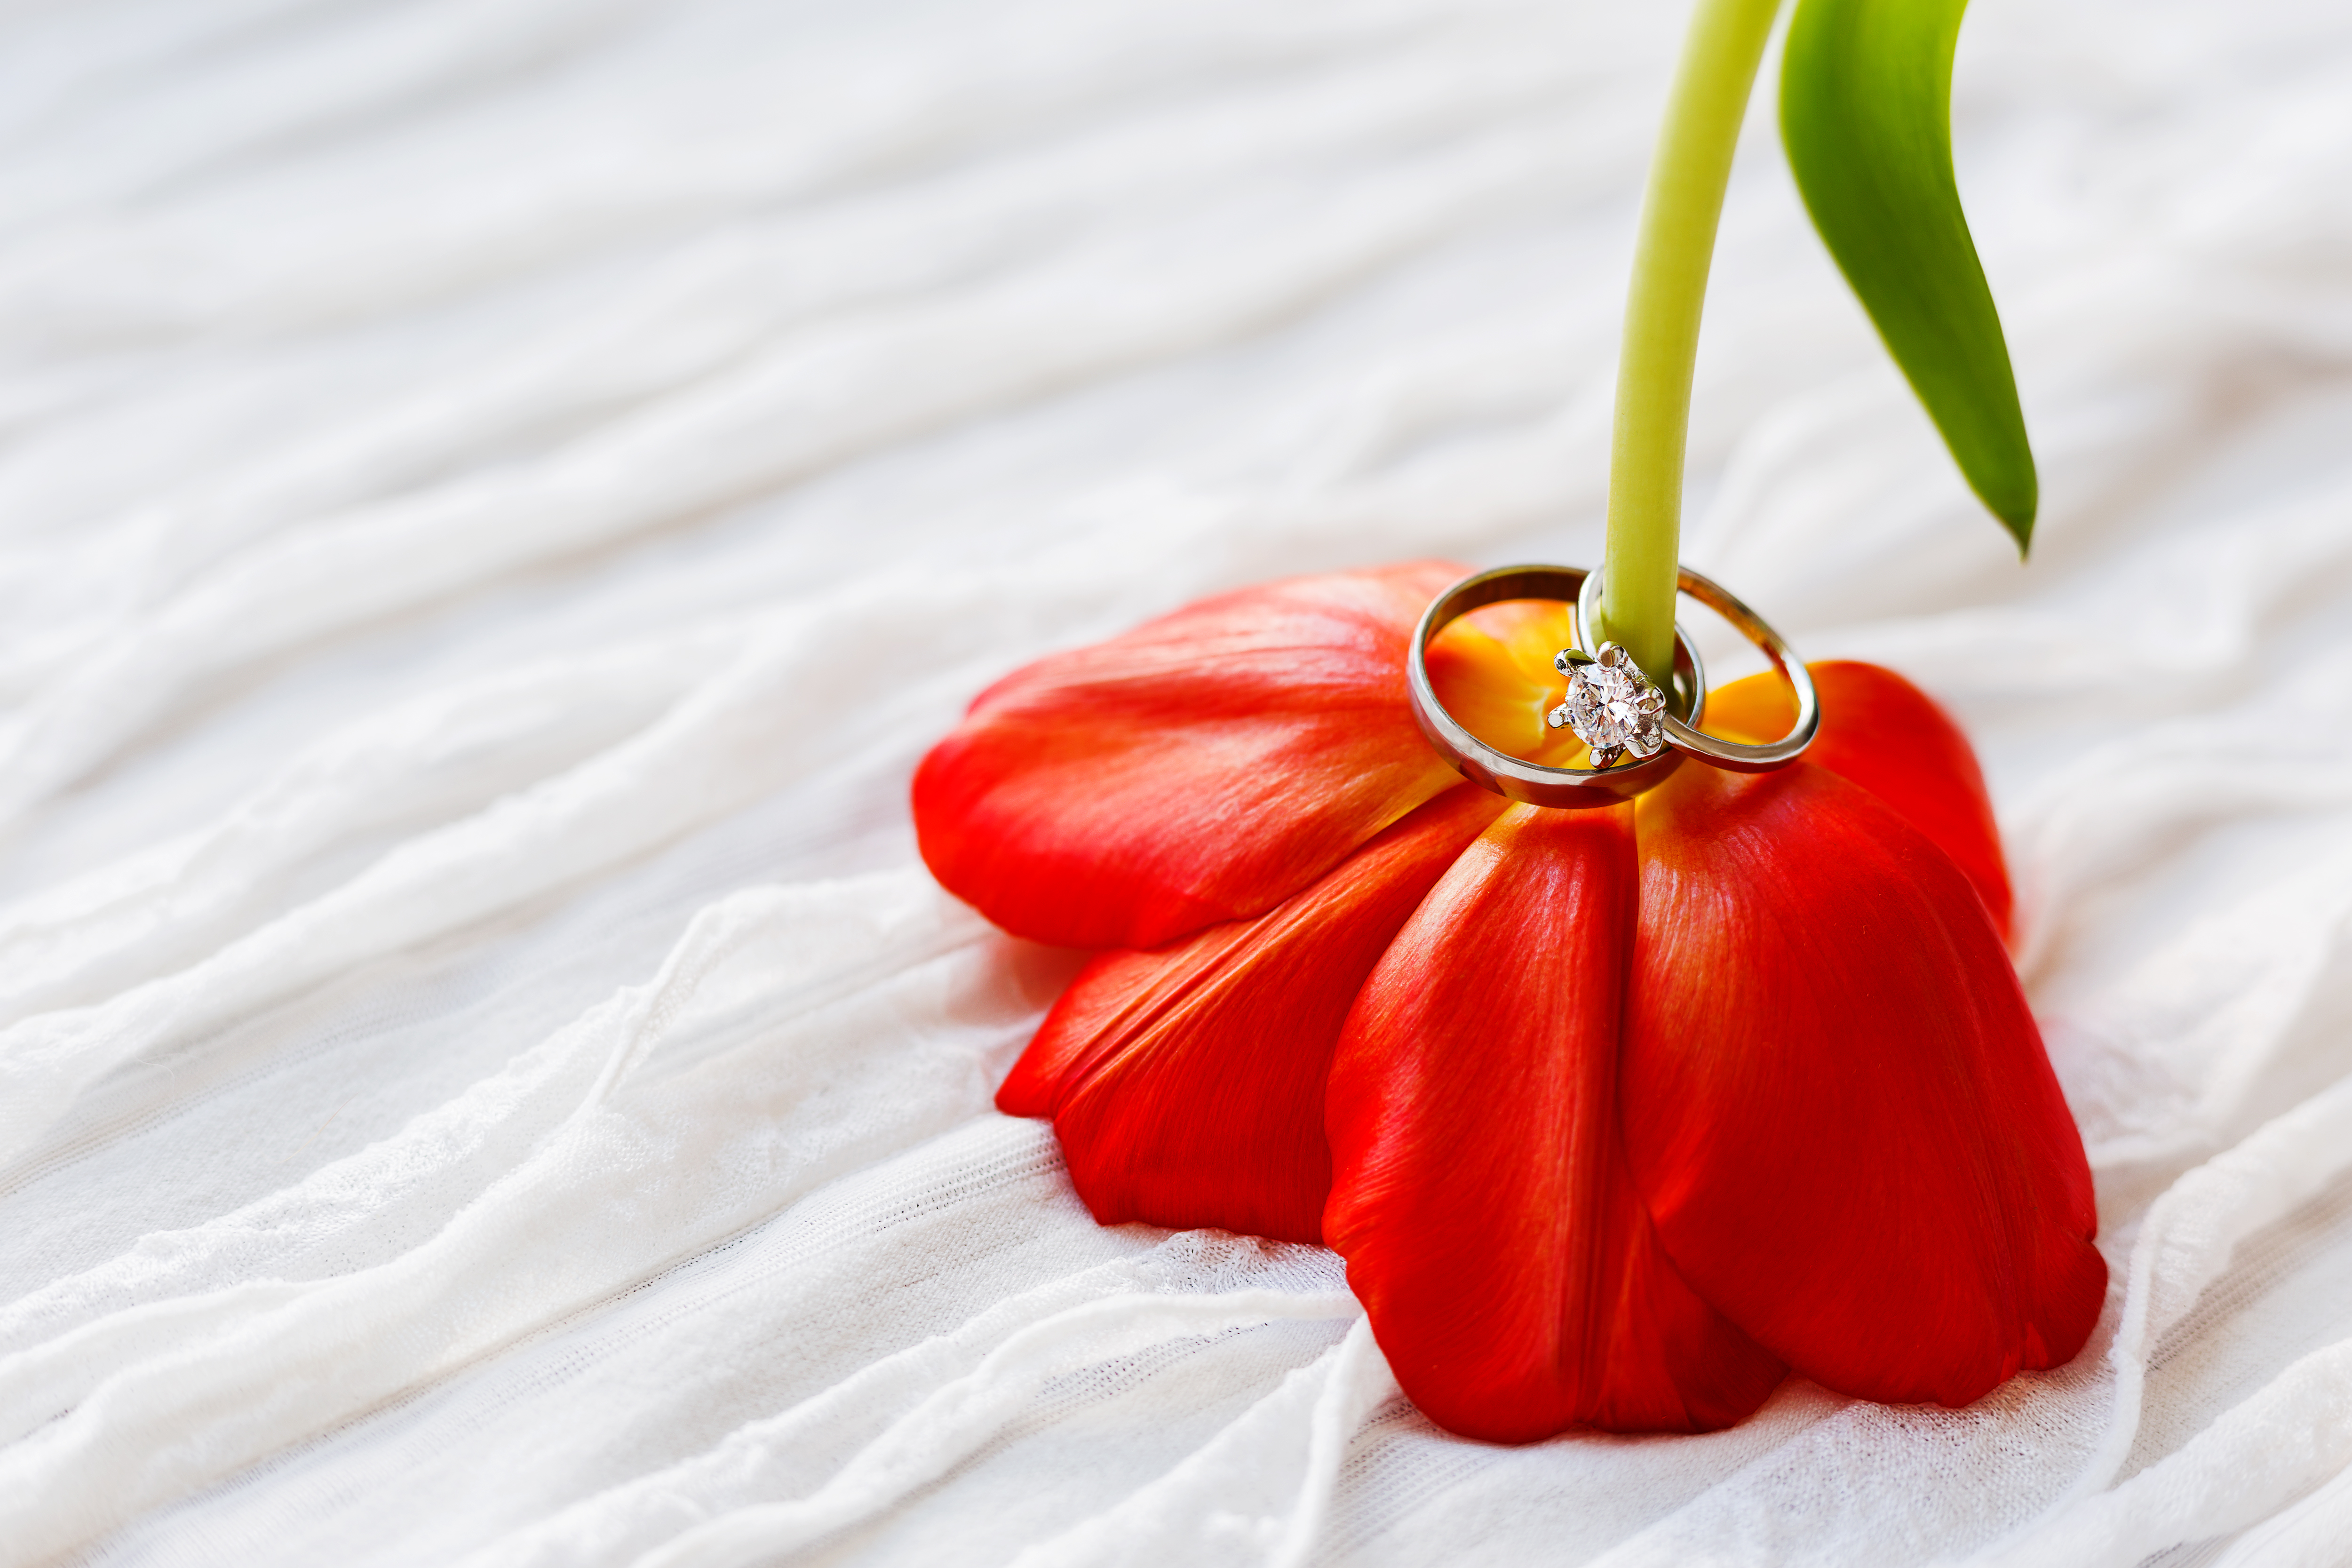 Pair of wedding and engagement rings with diamond on red tulip. Natural background with symbol of love and marriage. Close up.